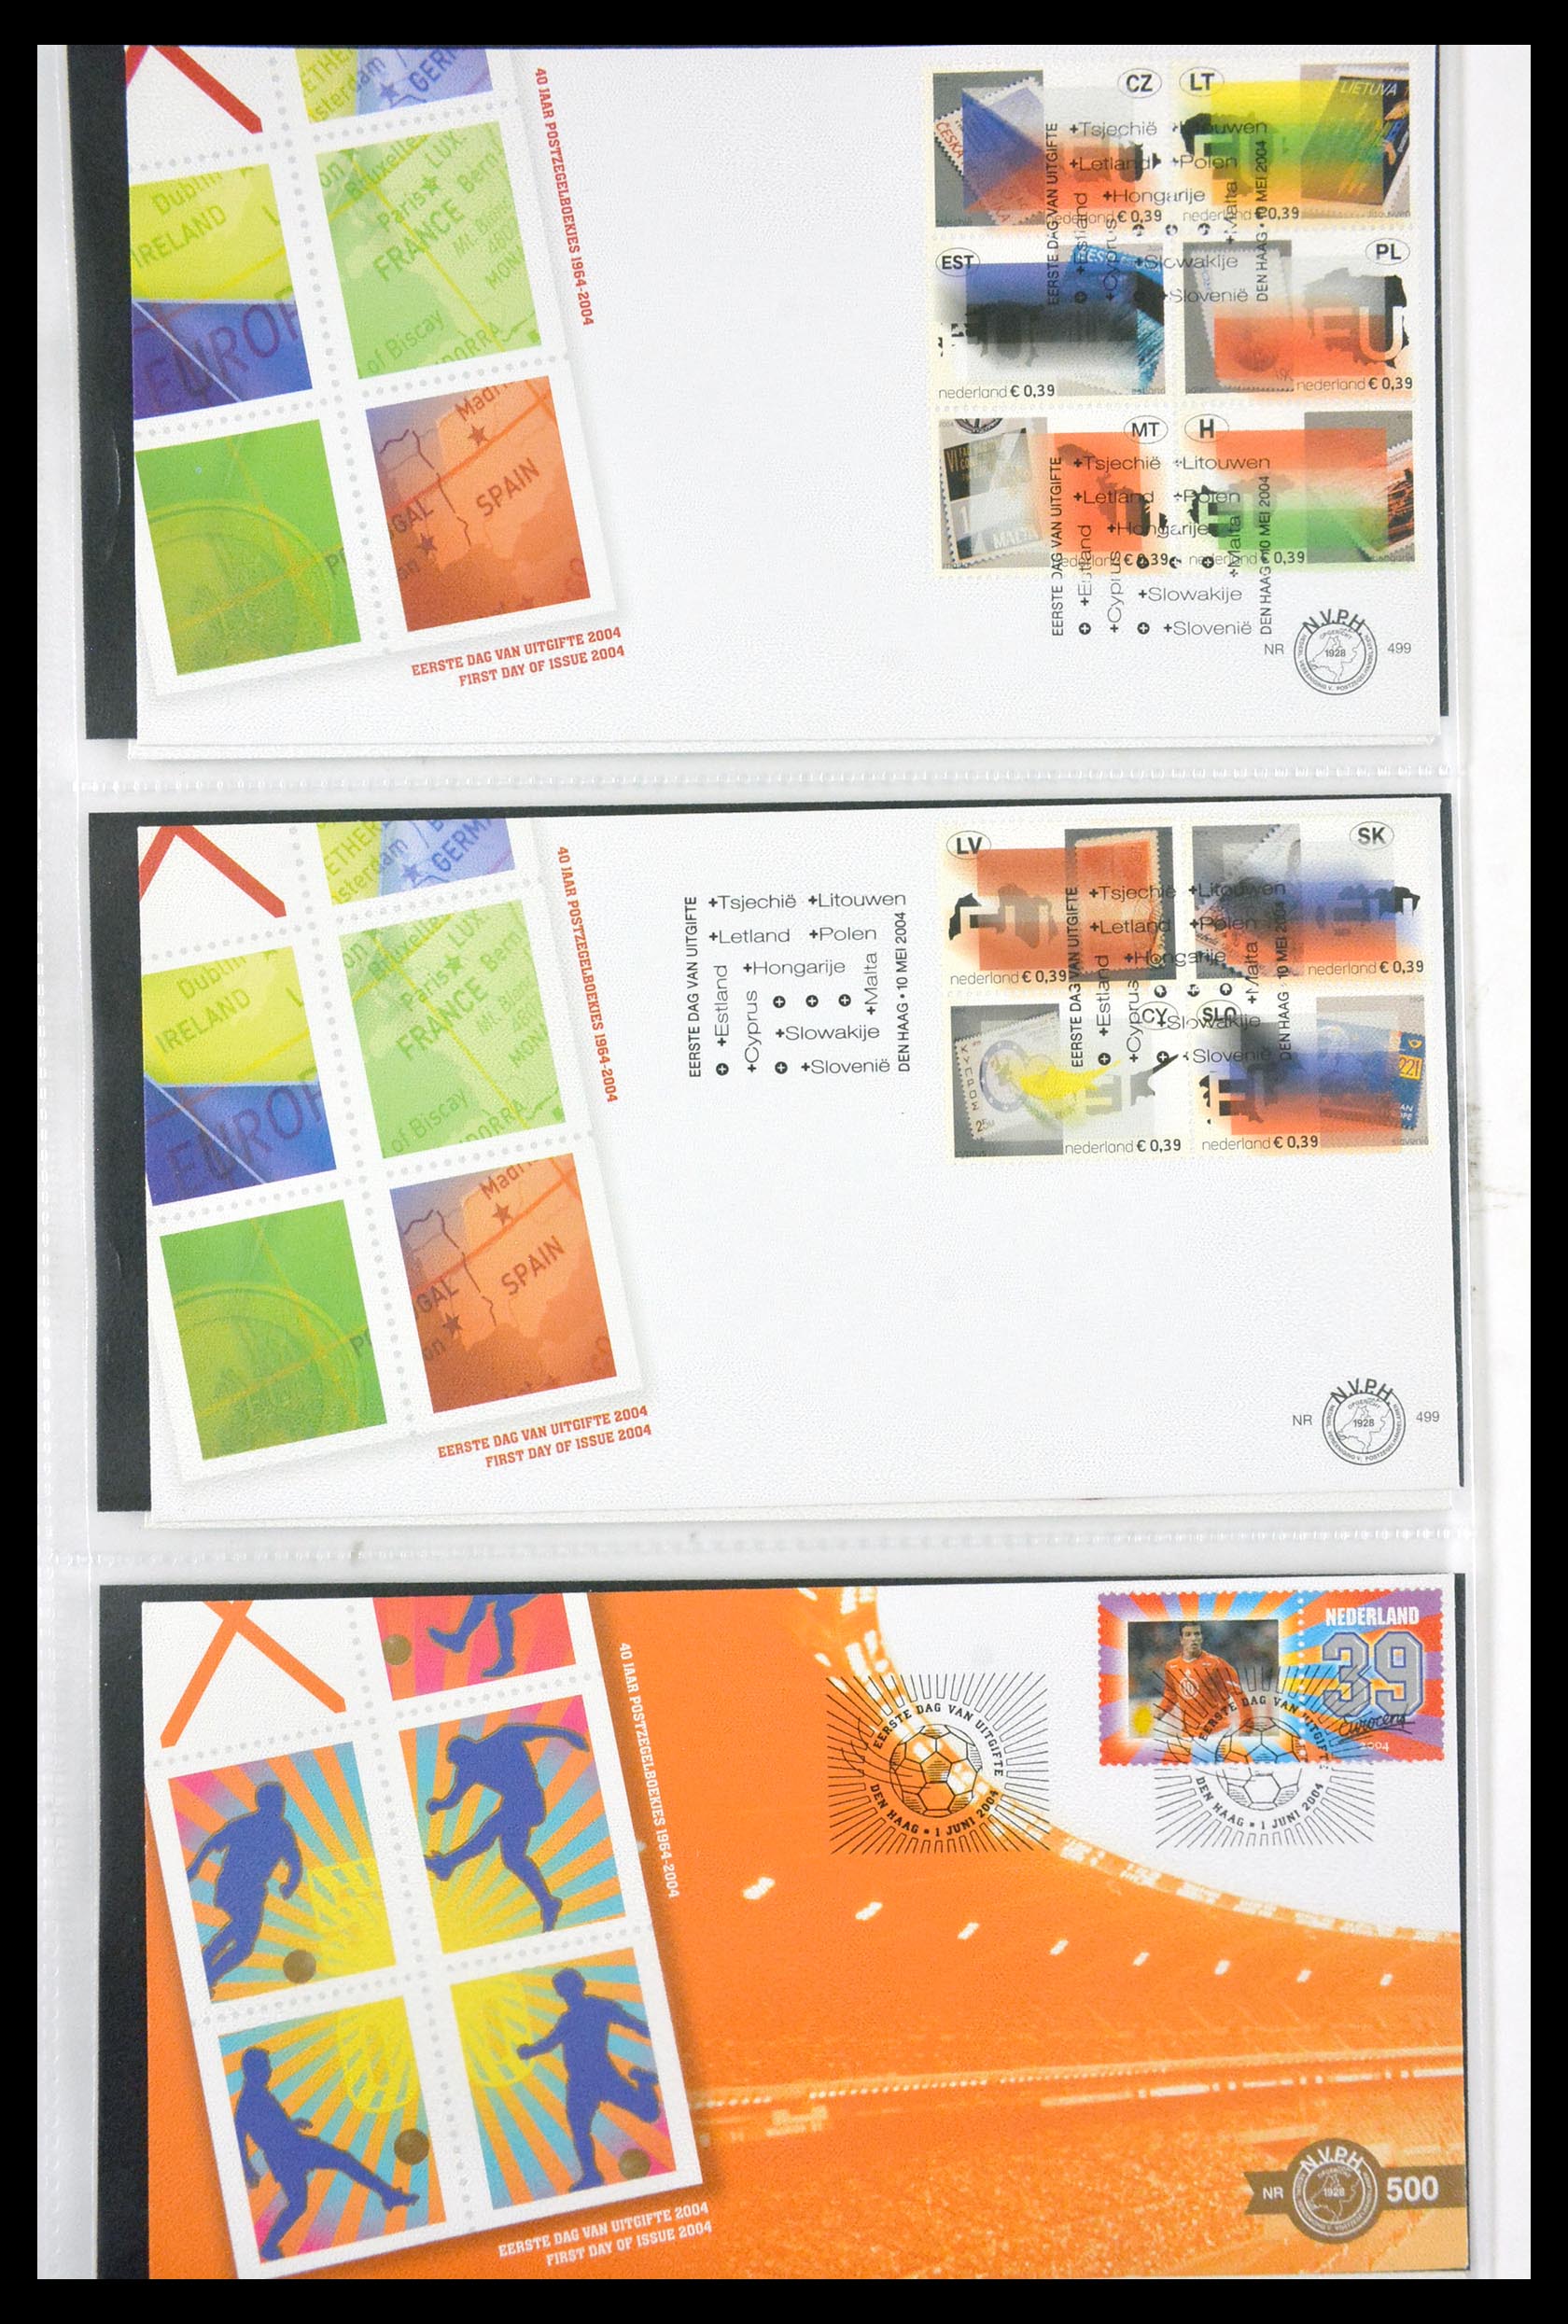 29850 027 - 29850 Netherlands FDC's 2001-2012.